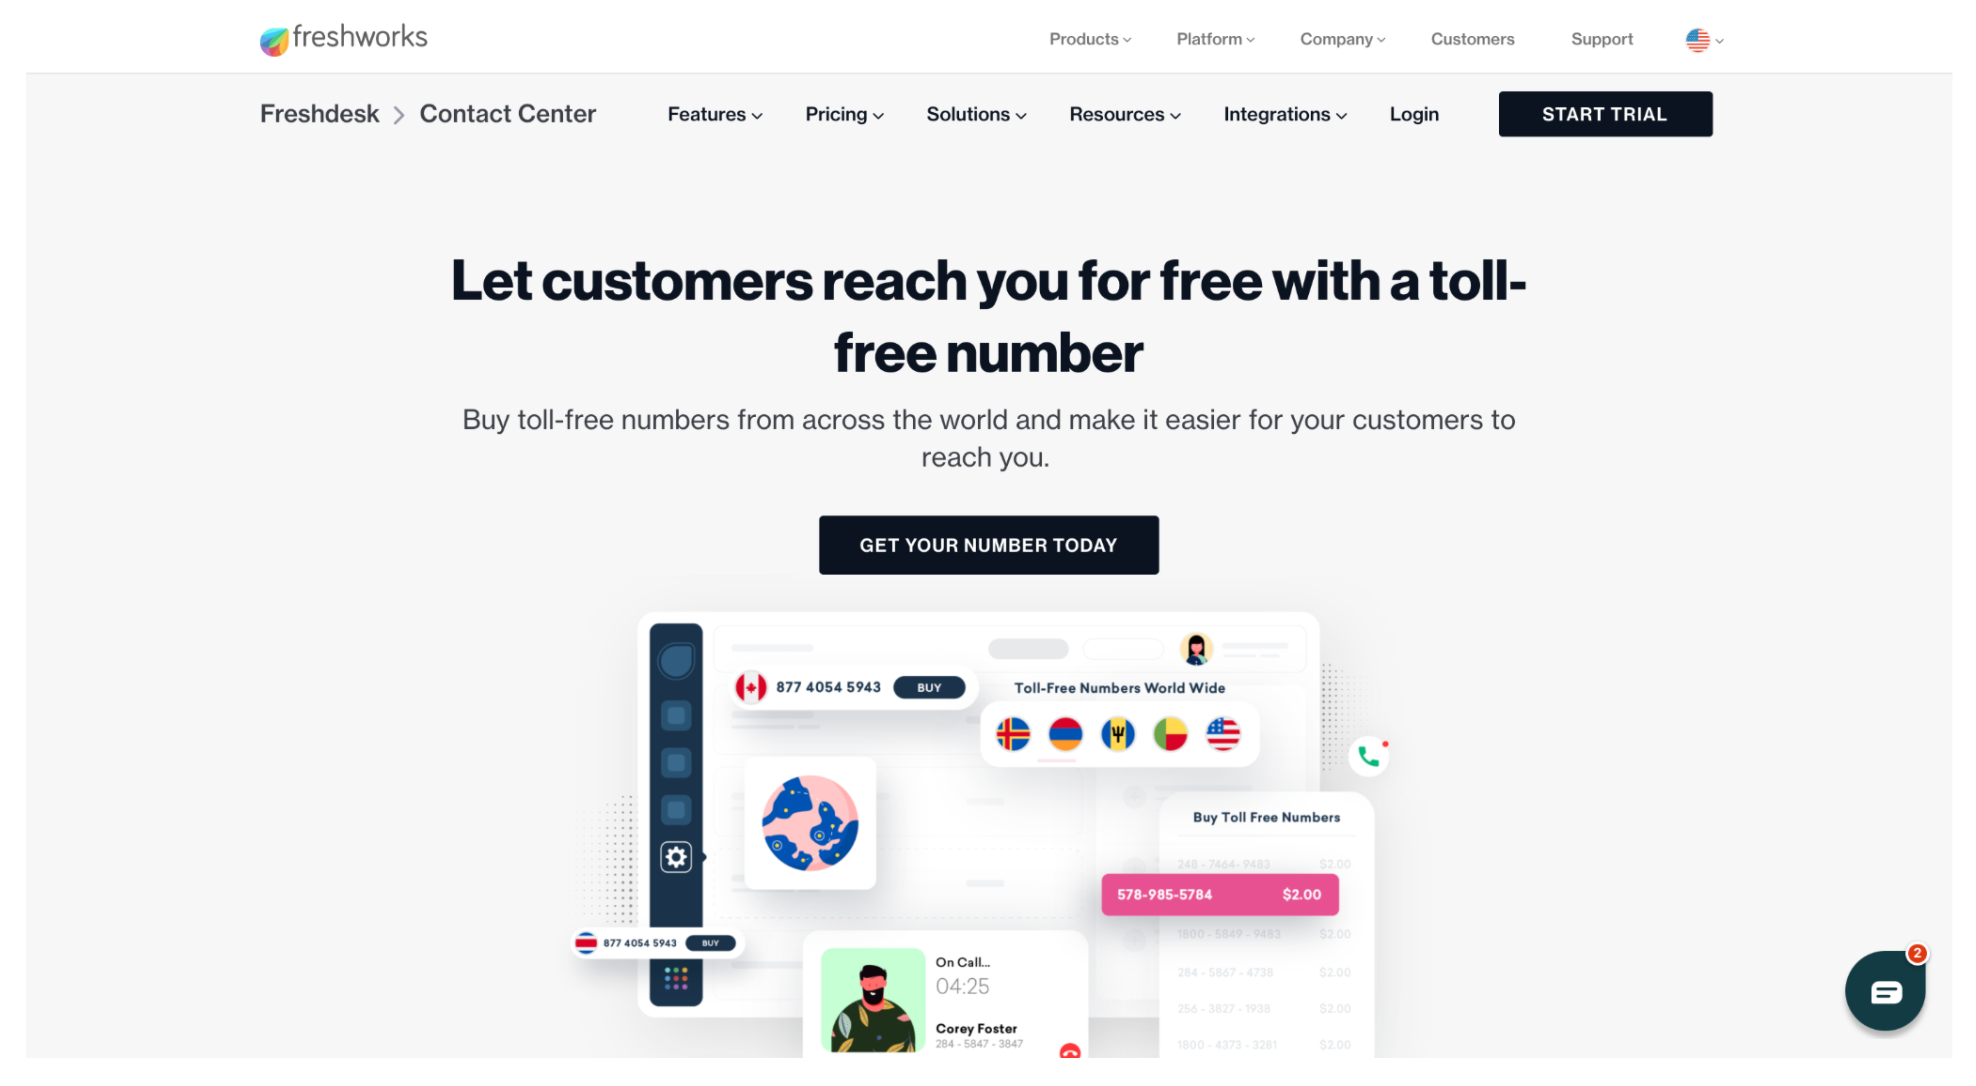 Freshworks Toll-Free Number Page